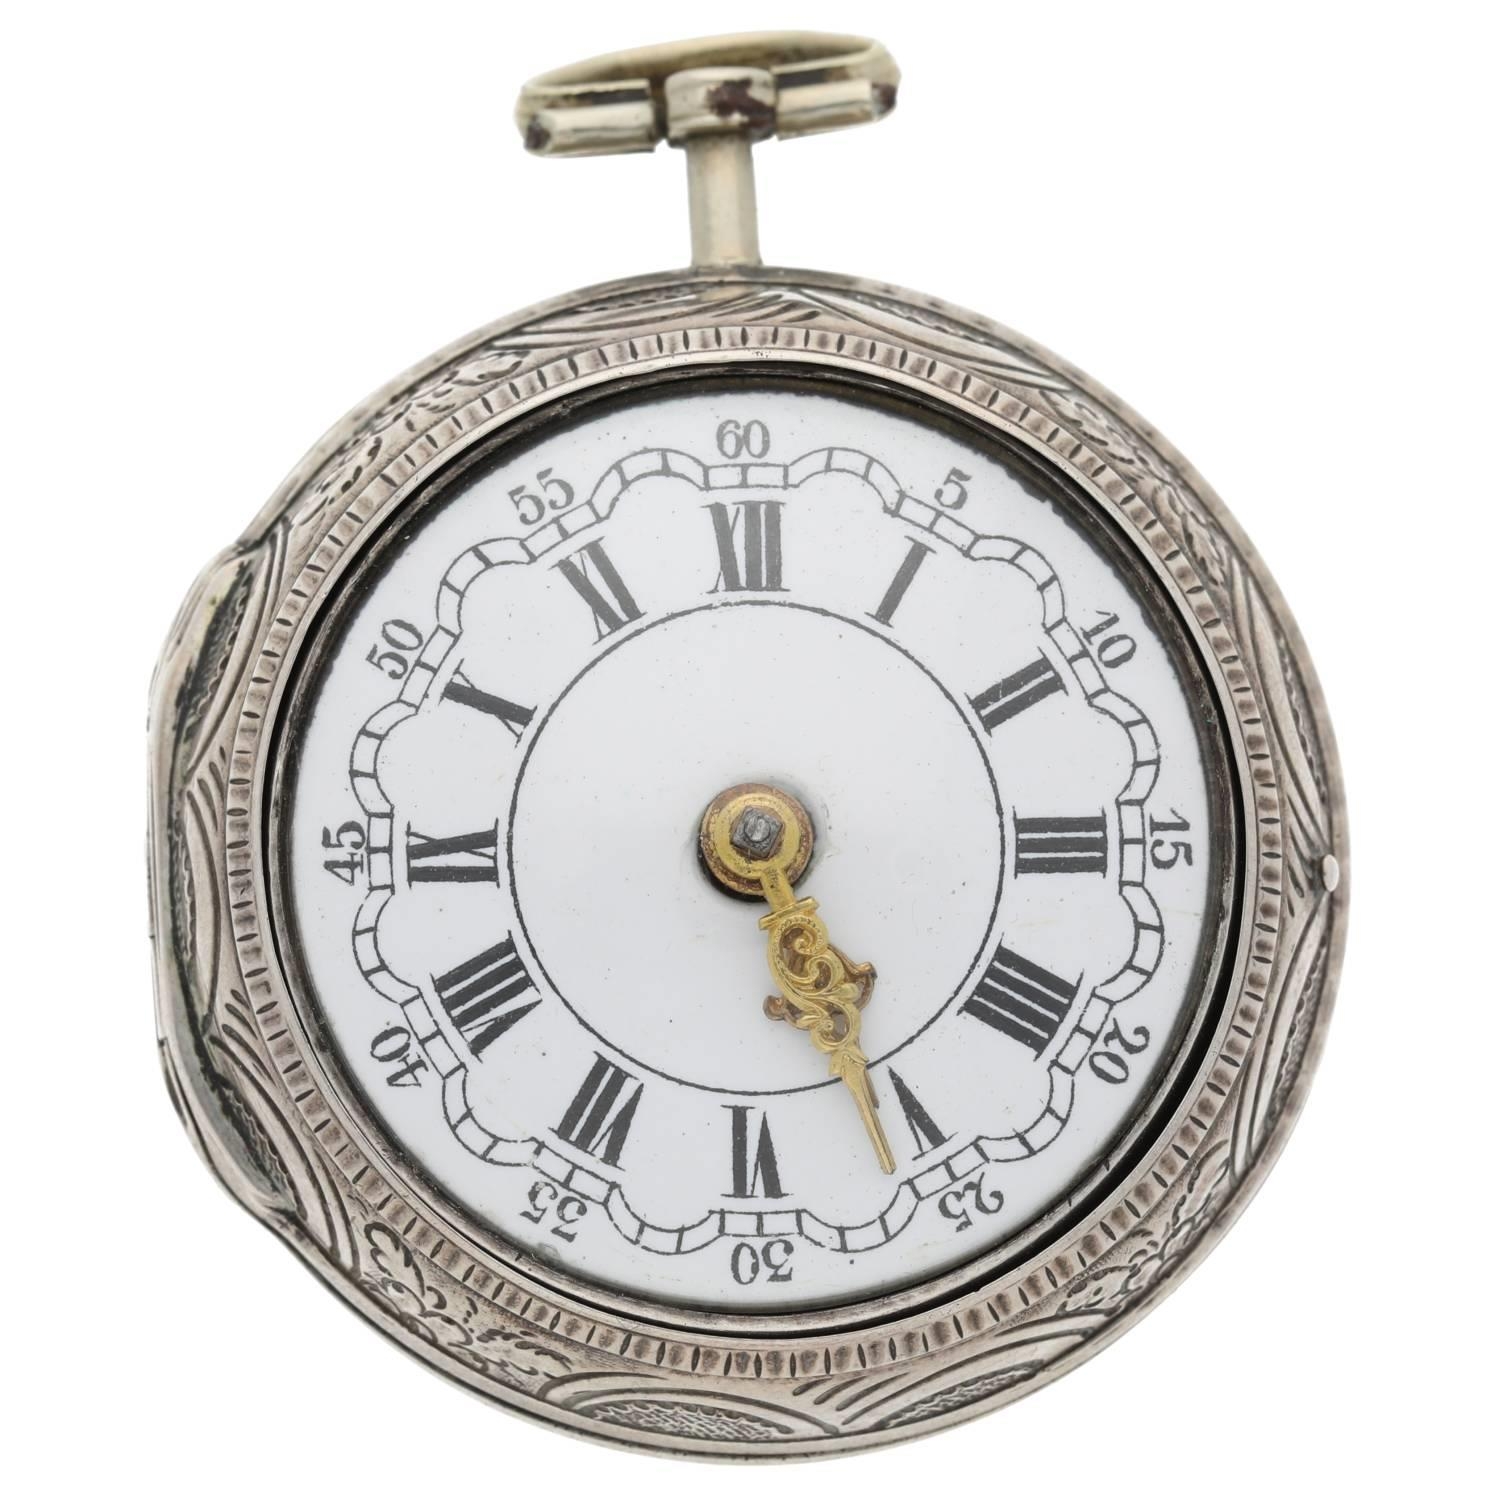 Samson, London - George III English silver repoussé pair cased verge pocket watch, London 1785, - Image 2 of 10